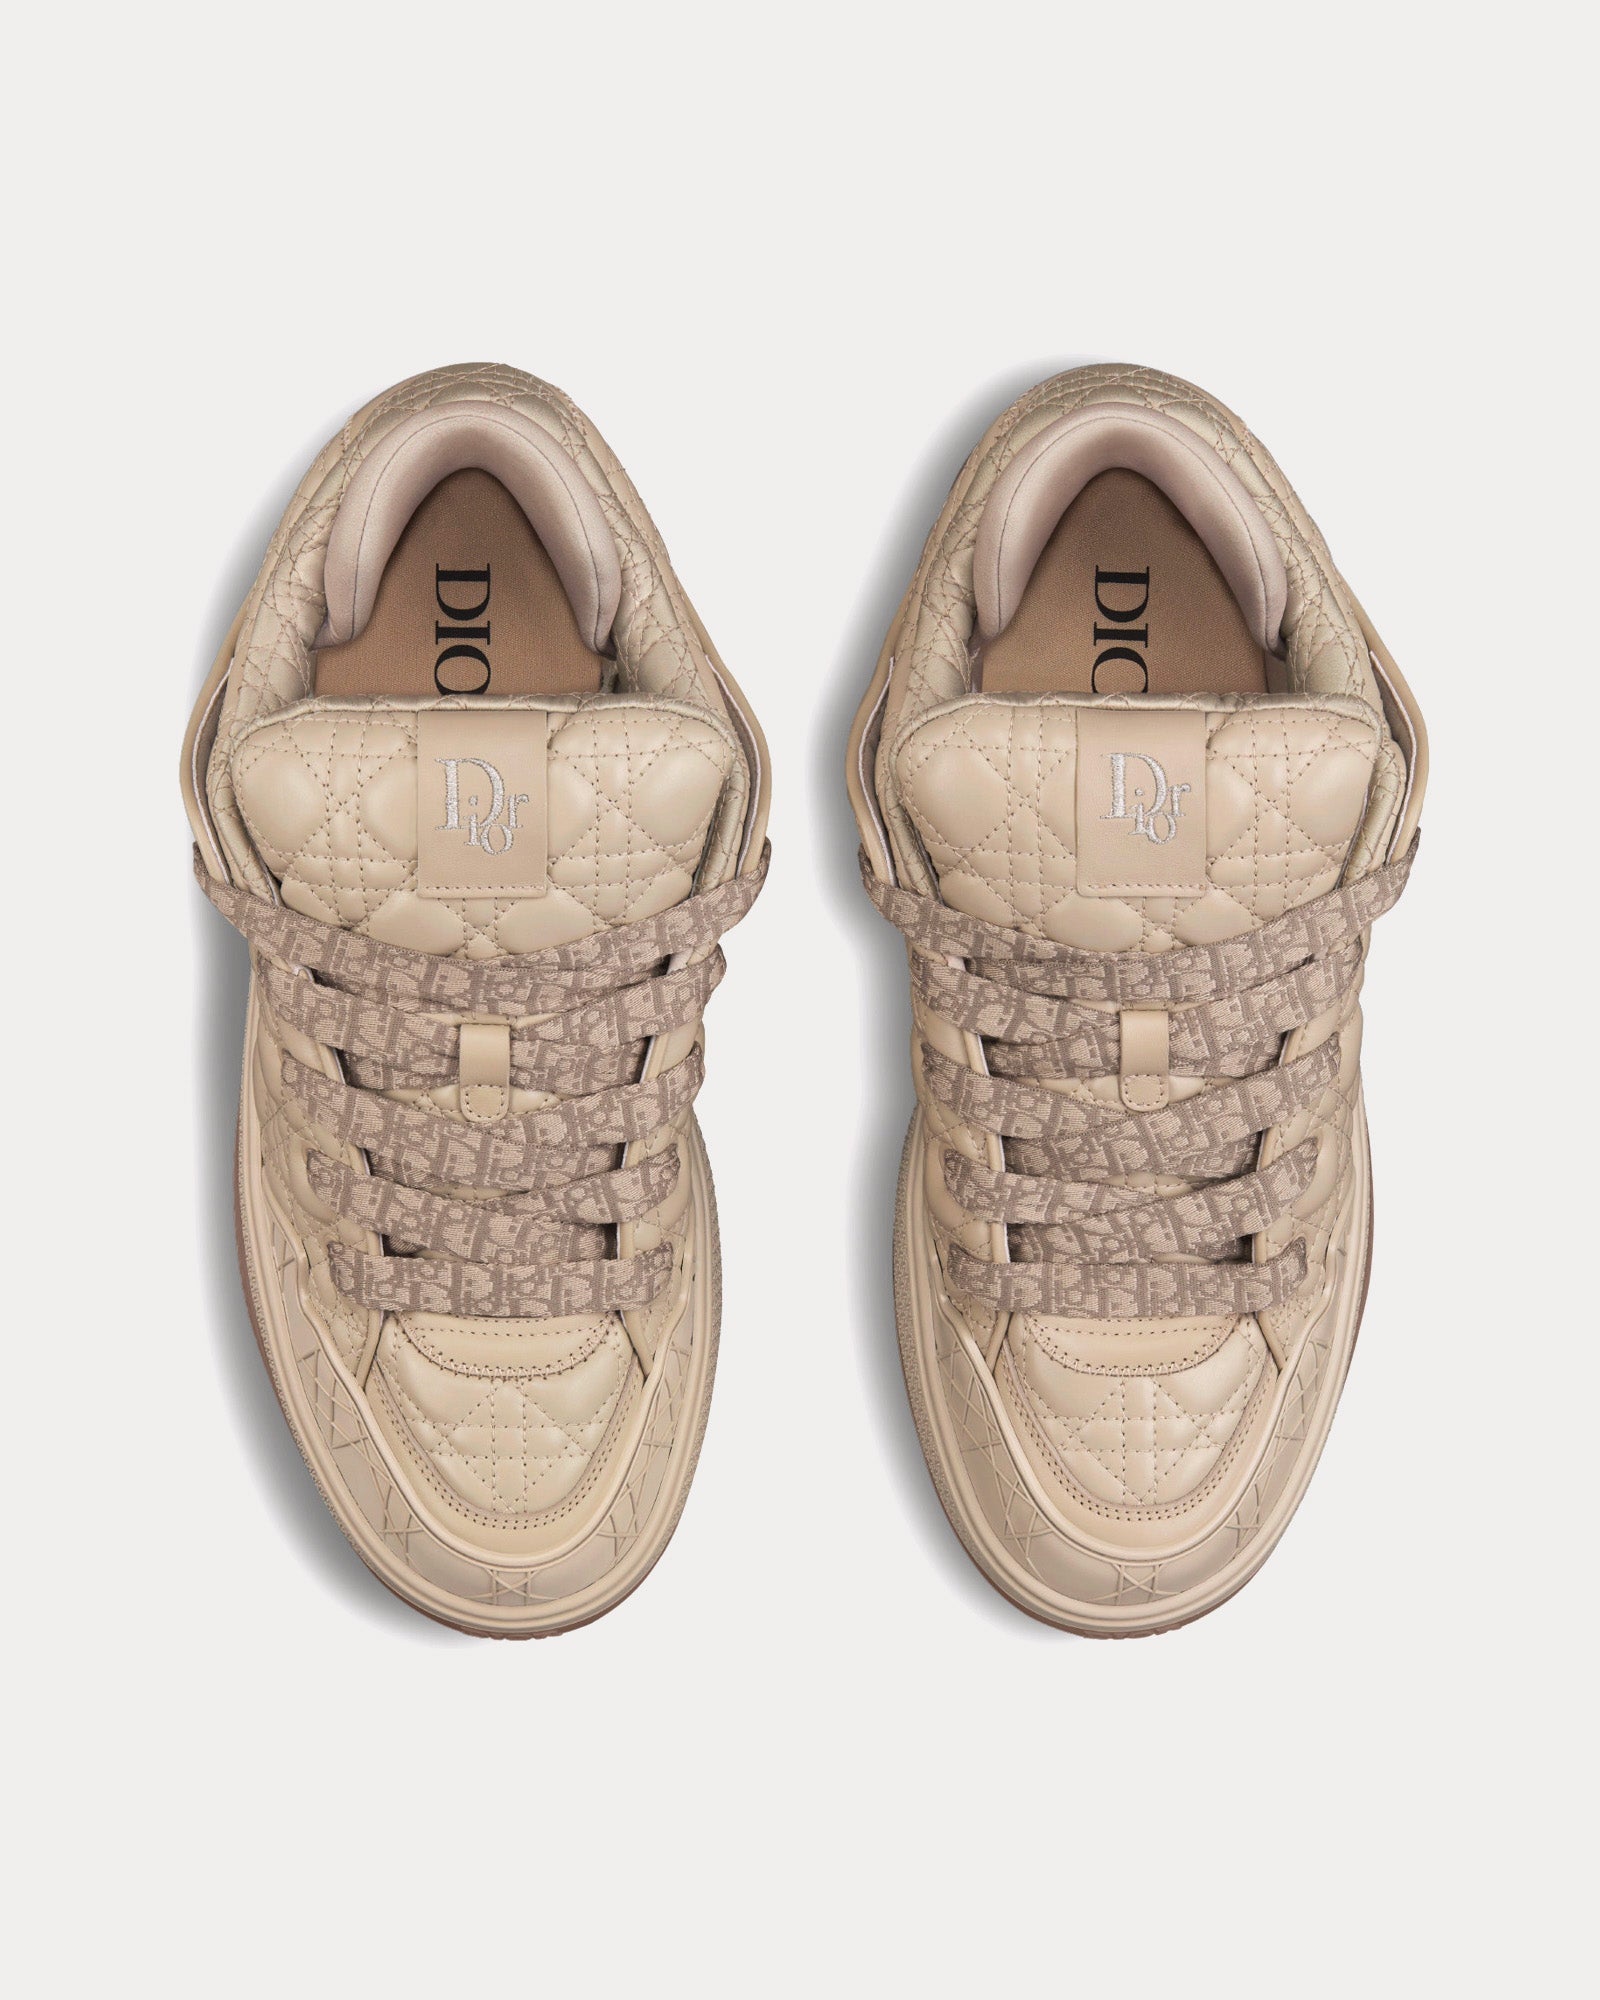 Dior - B9S Skater Limited And Numbered Edition Beige Cannage Kumo Leather Low Top Sneakers